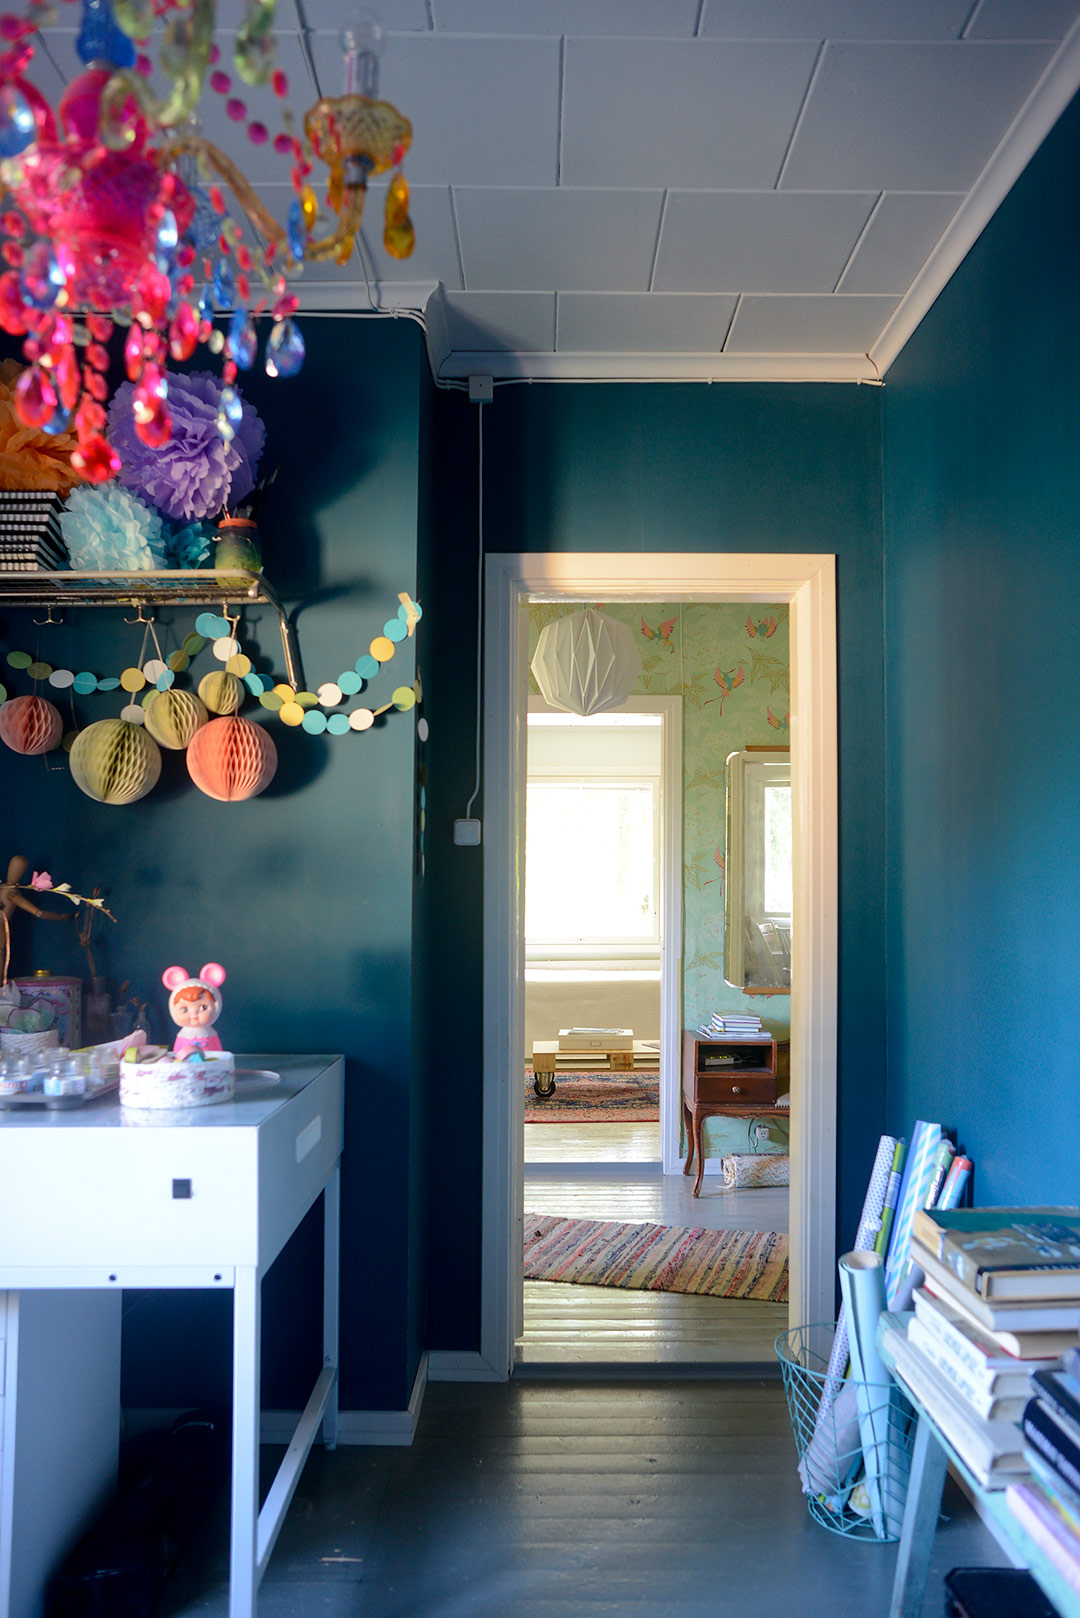 Petrol blue, pastels and kitsch in  the home office